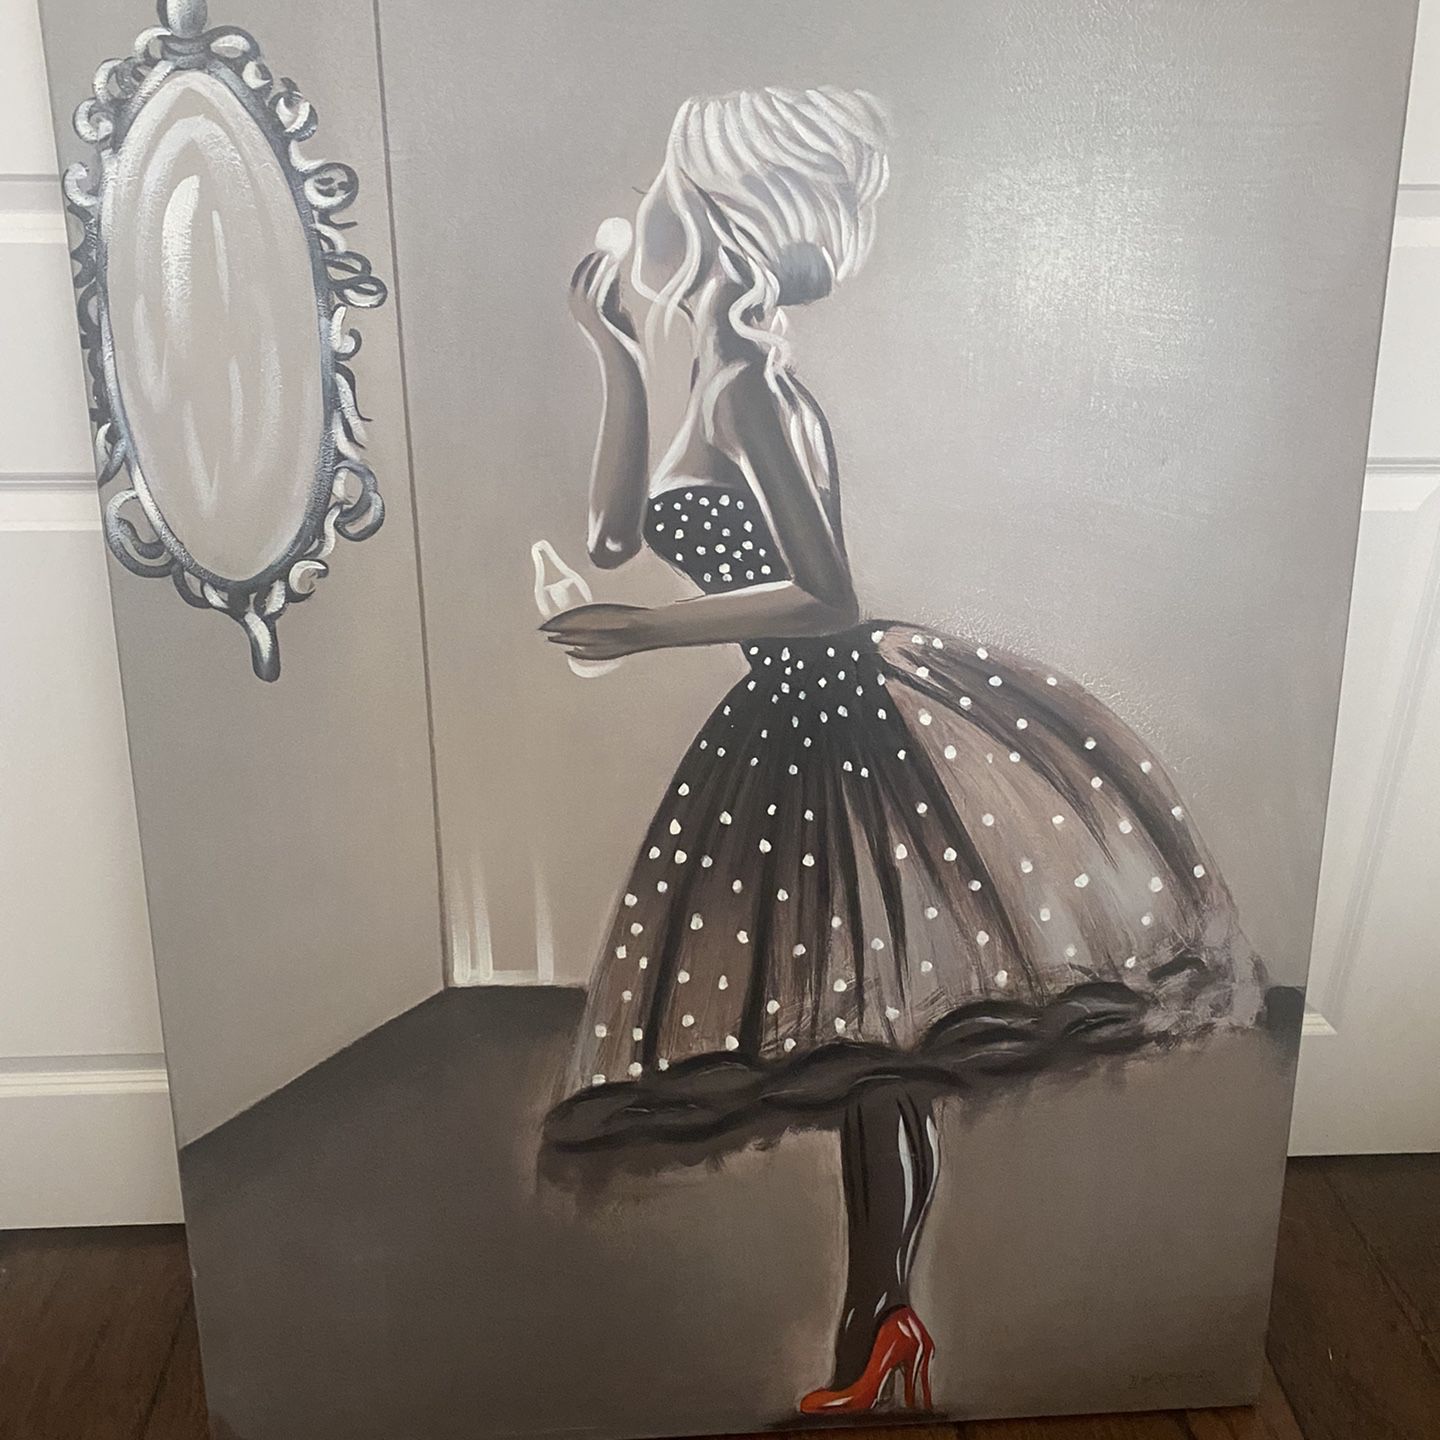 Supreme Drip Painting for Sale in Stockton, CA - OfferUp